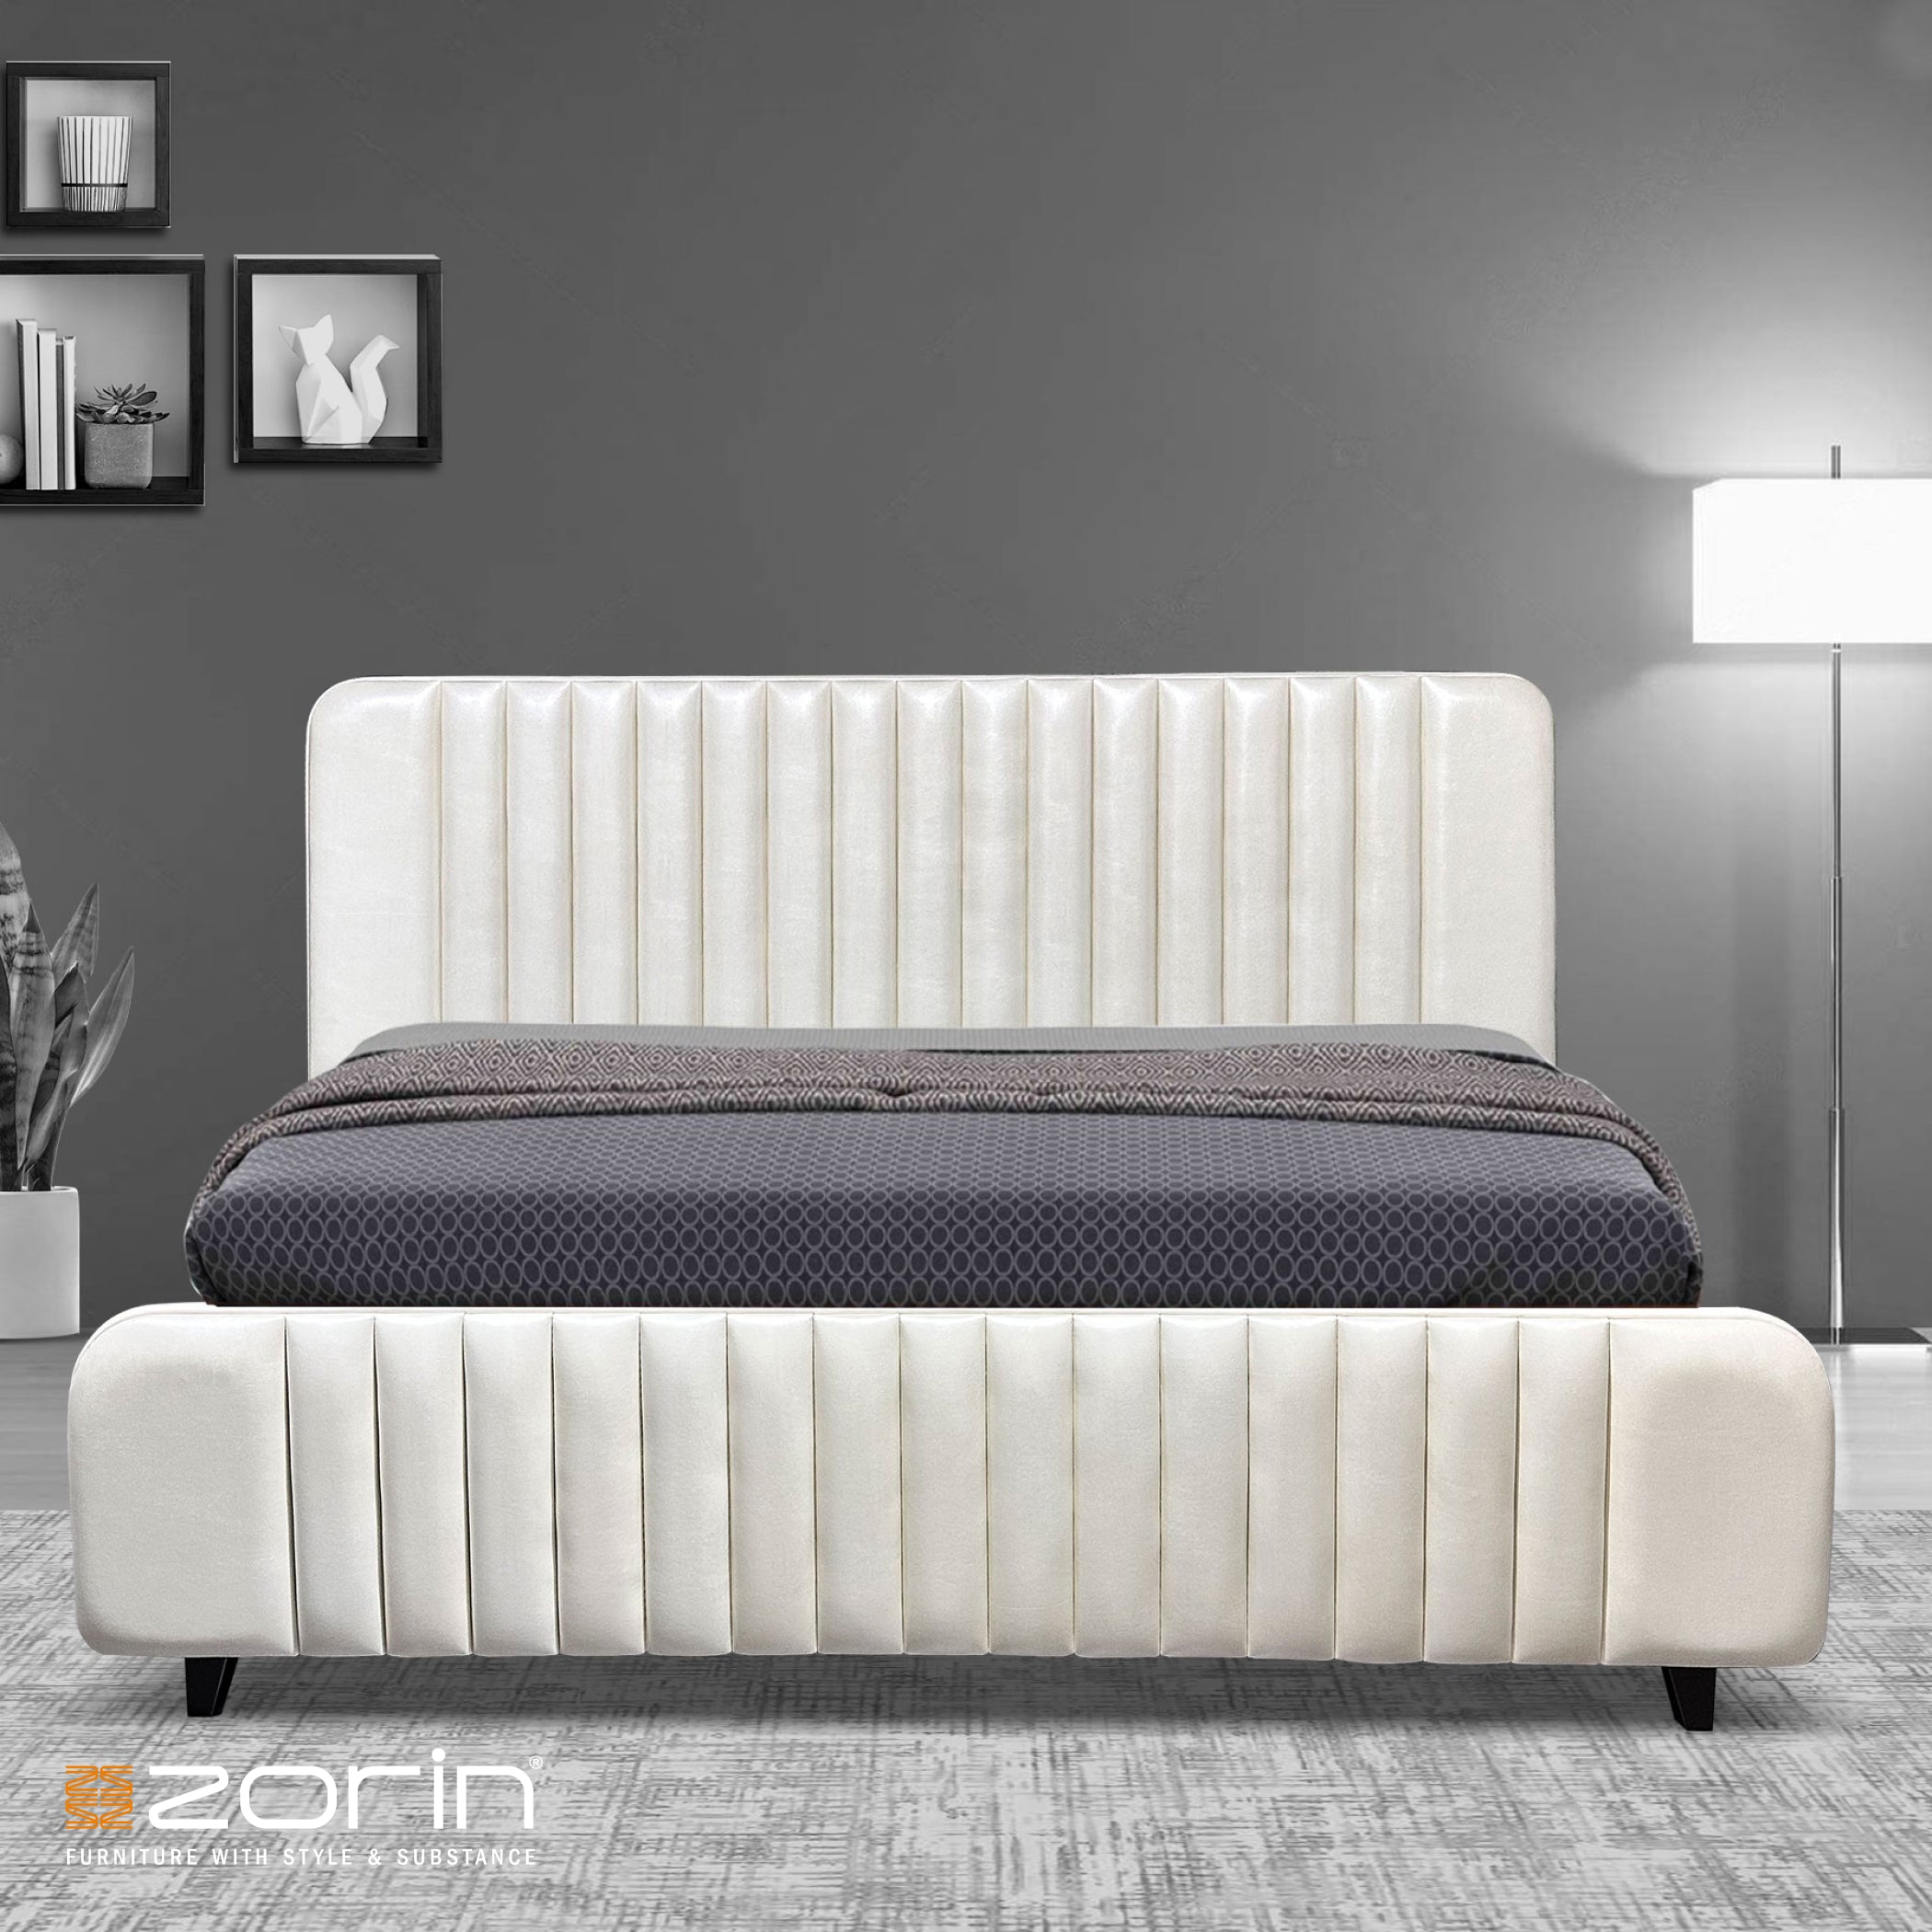 Bliss King Hydraulic Bed Zorin